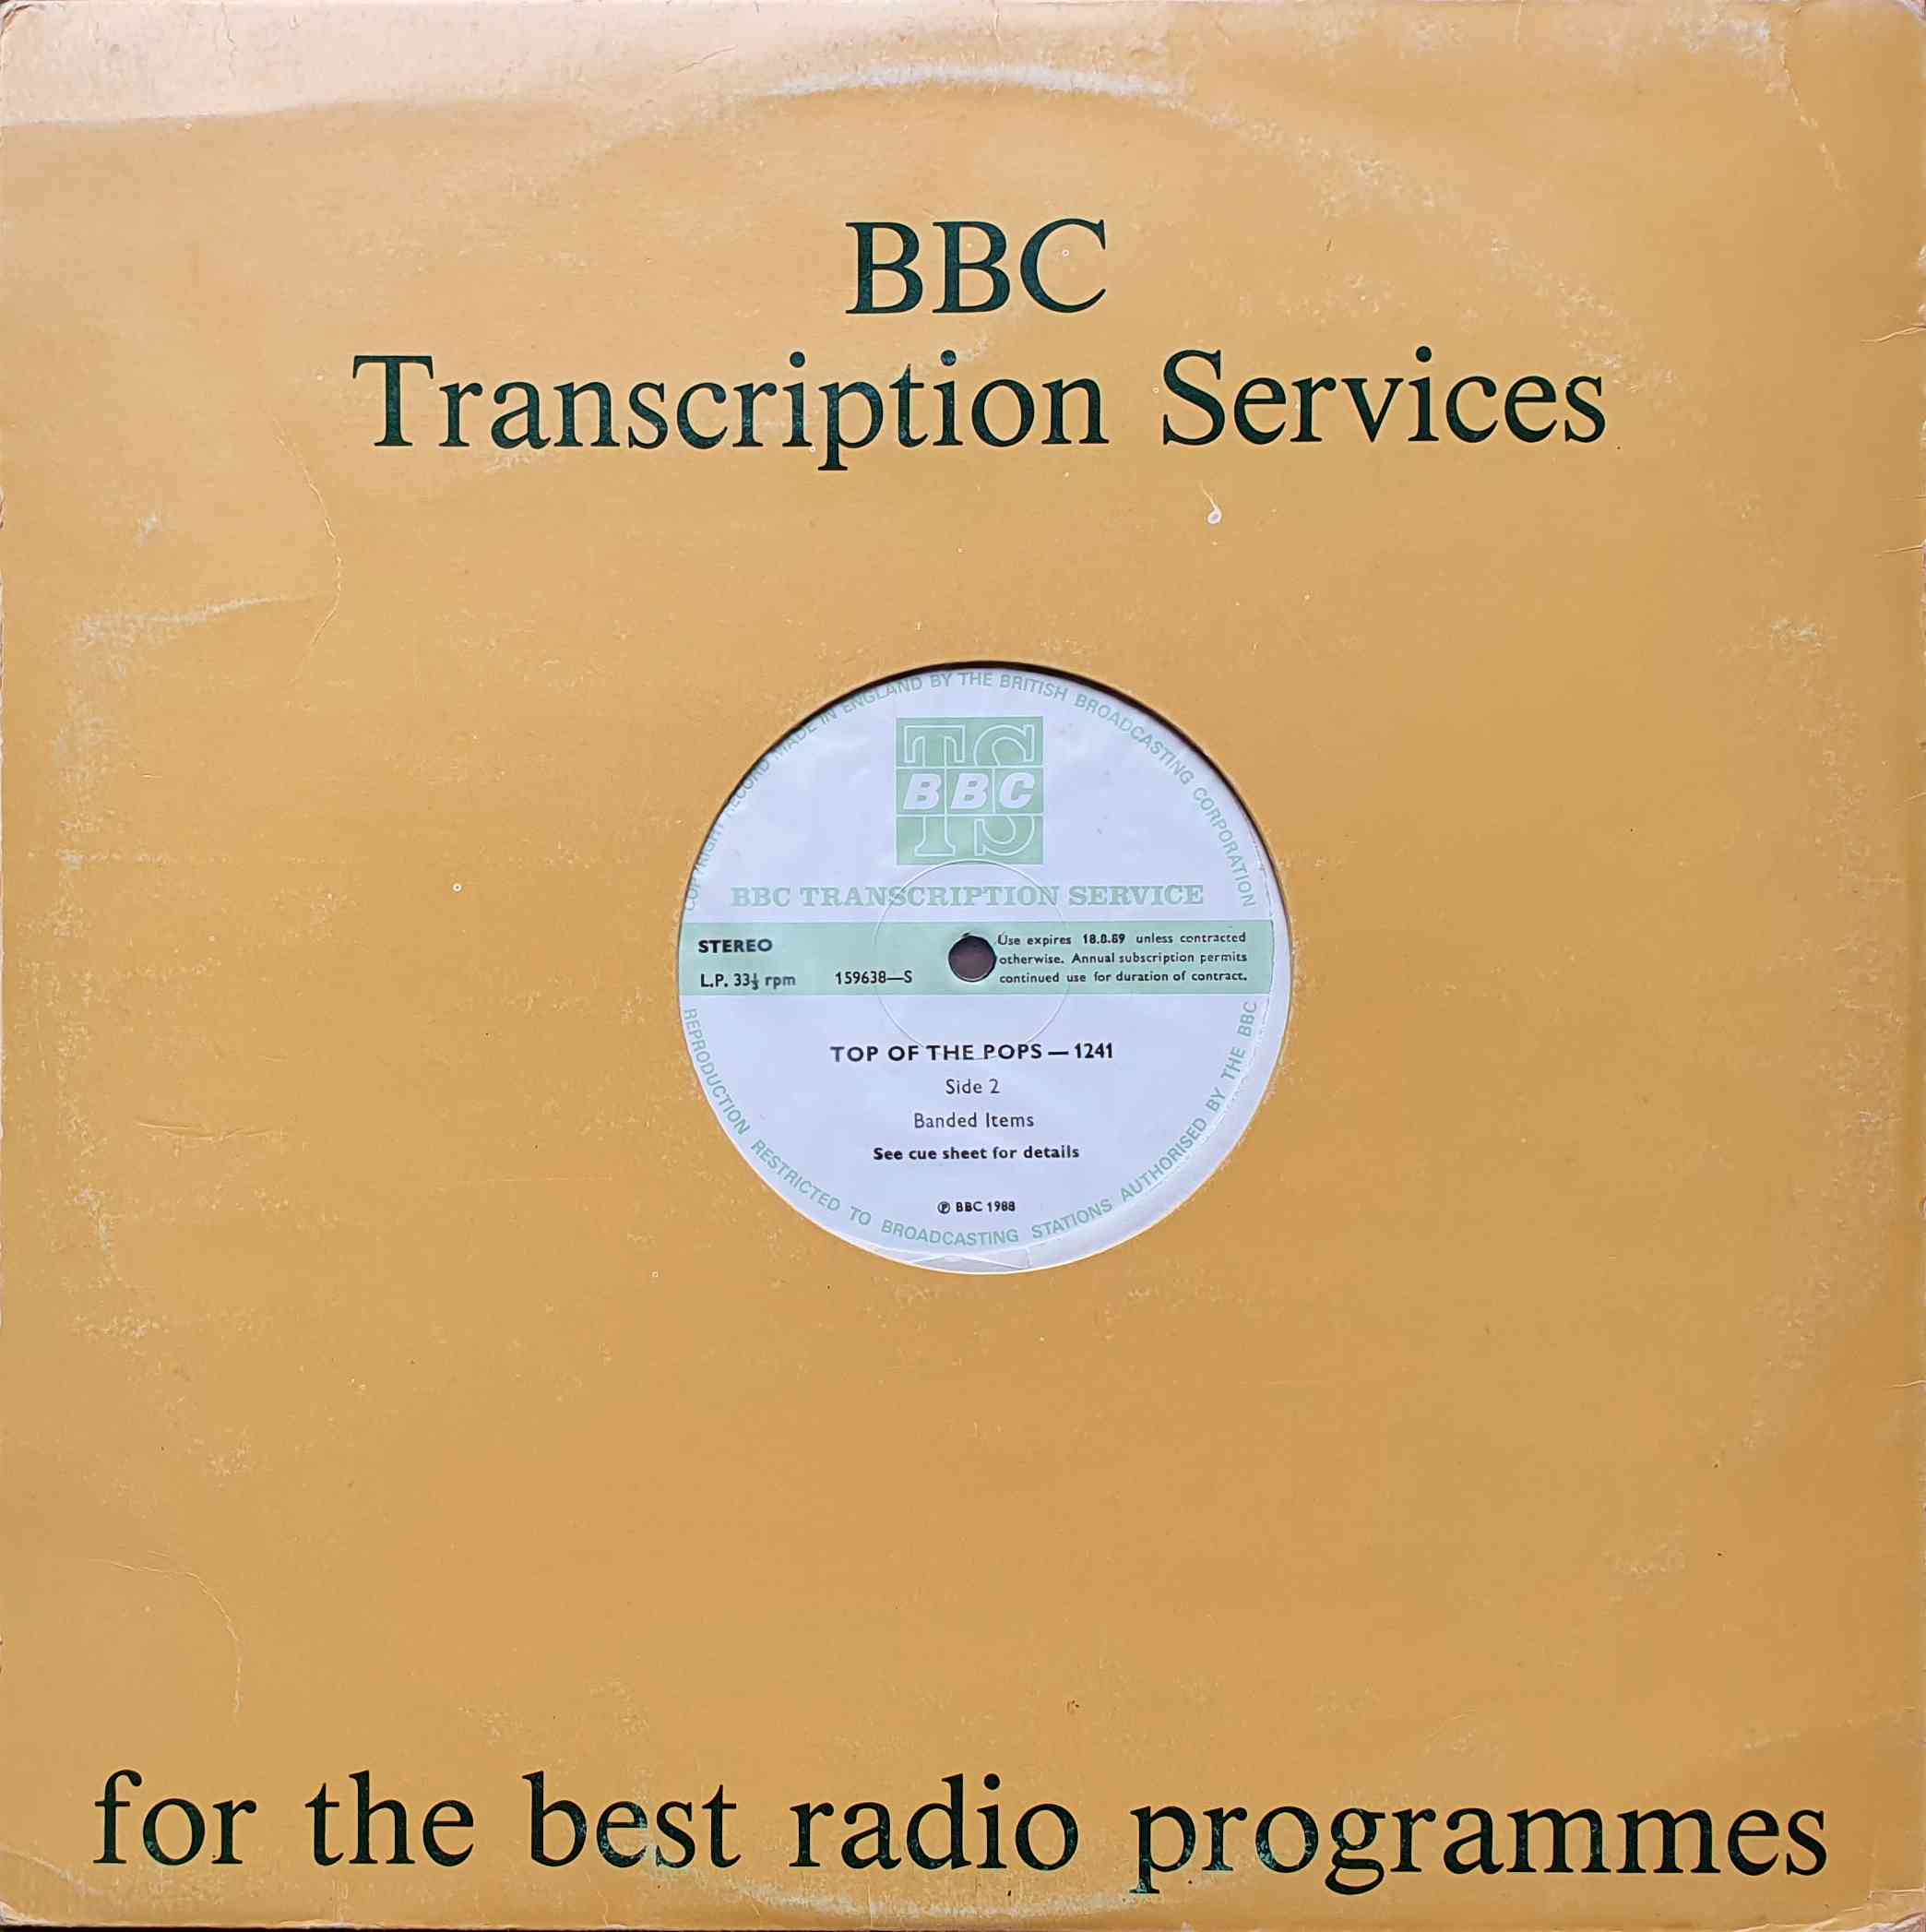 Picture of 159637 - S Top of the pops - 1241 by artist Various from the BBC records and Tapes library